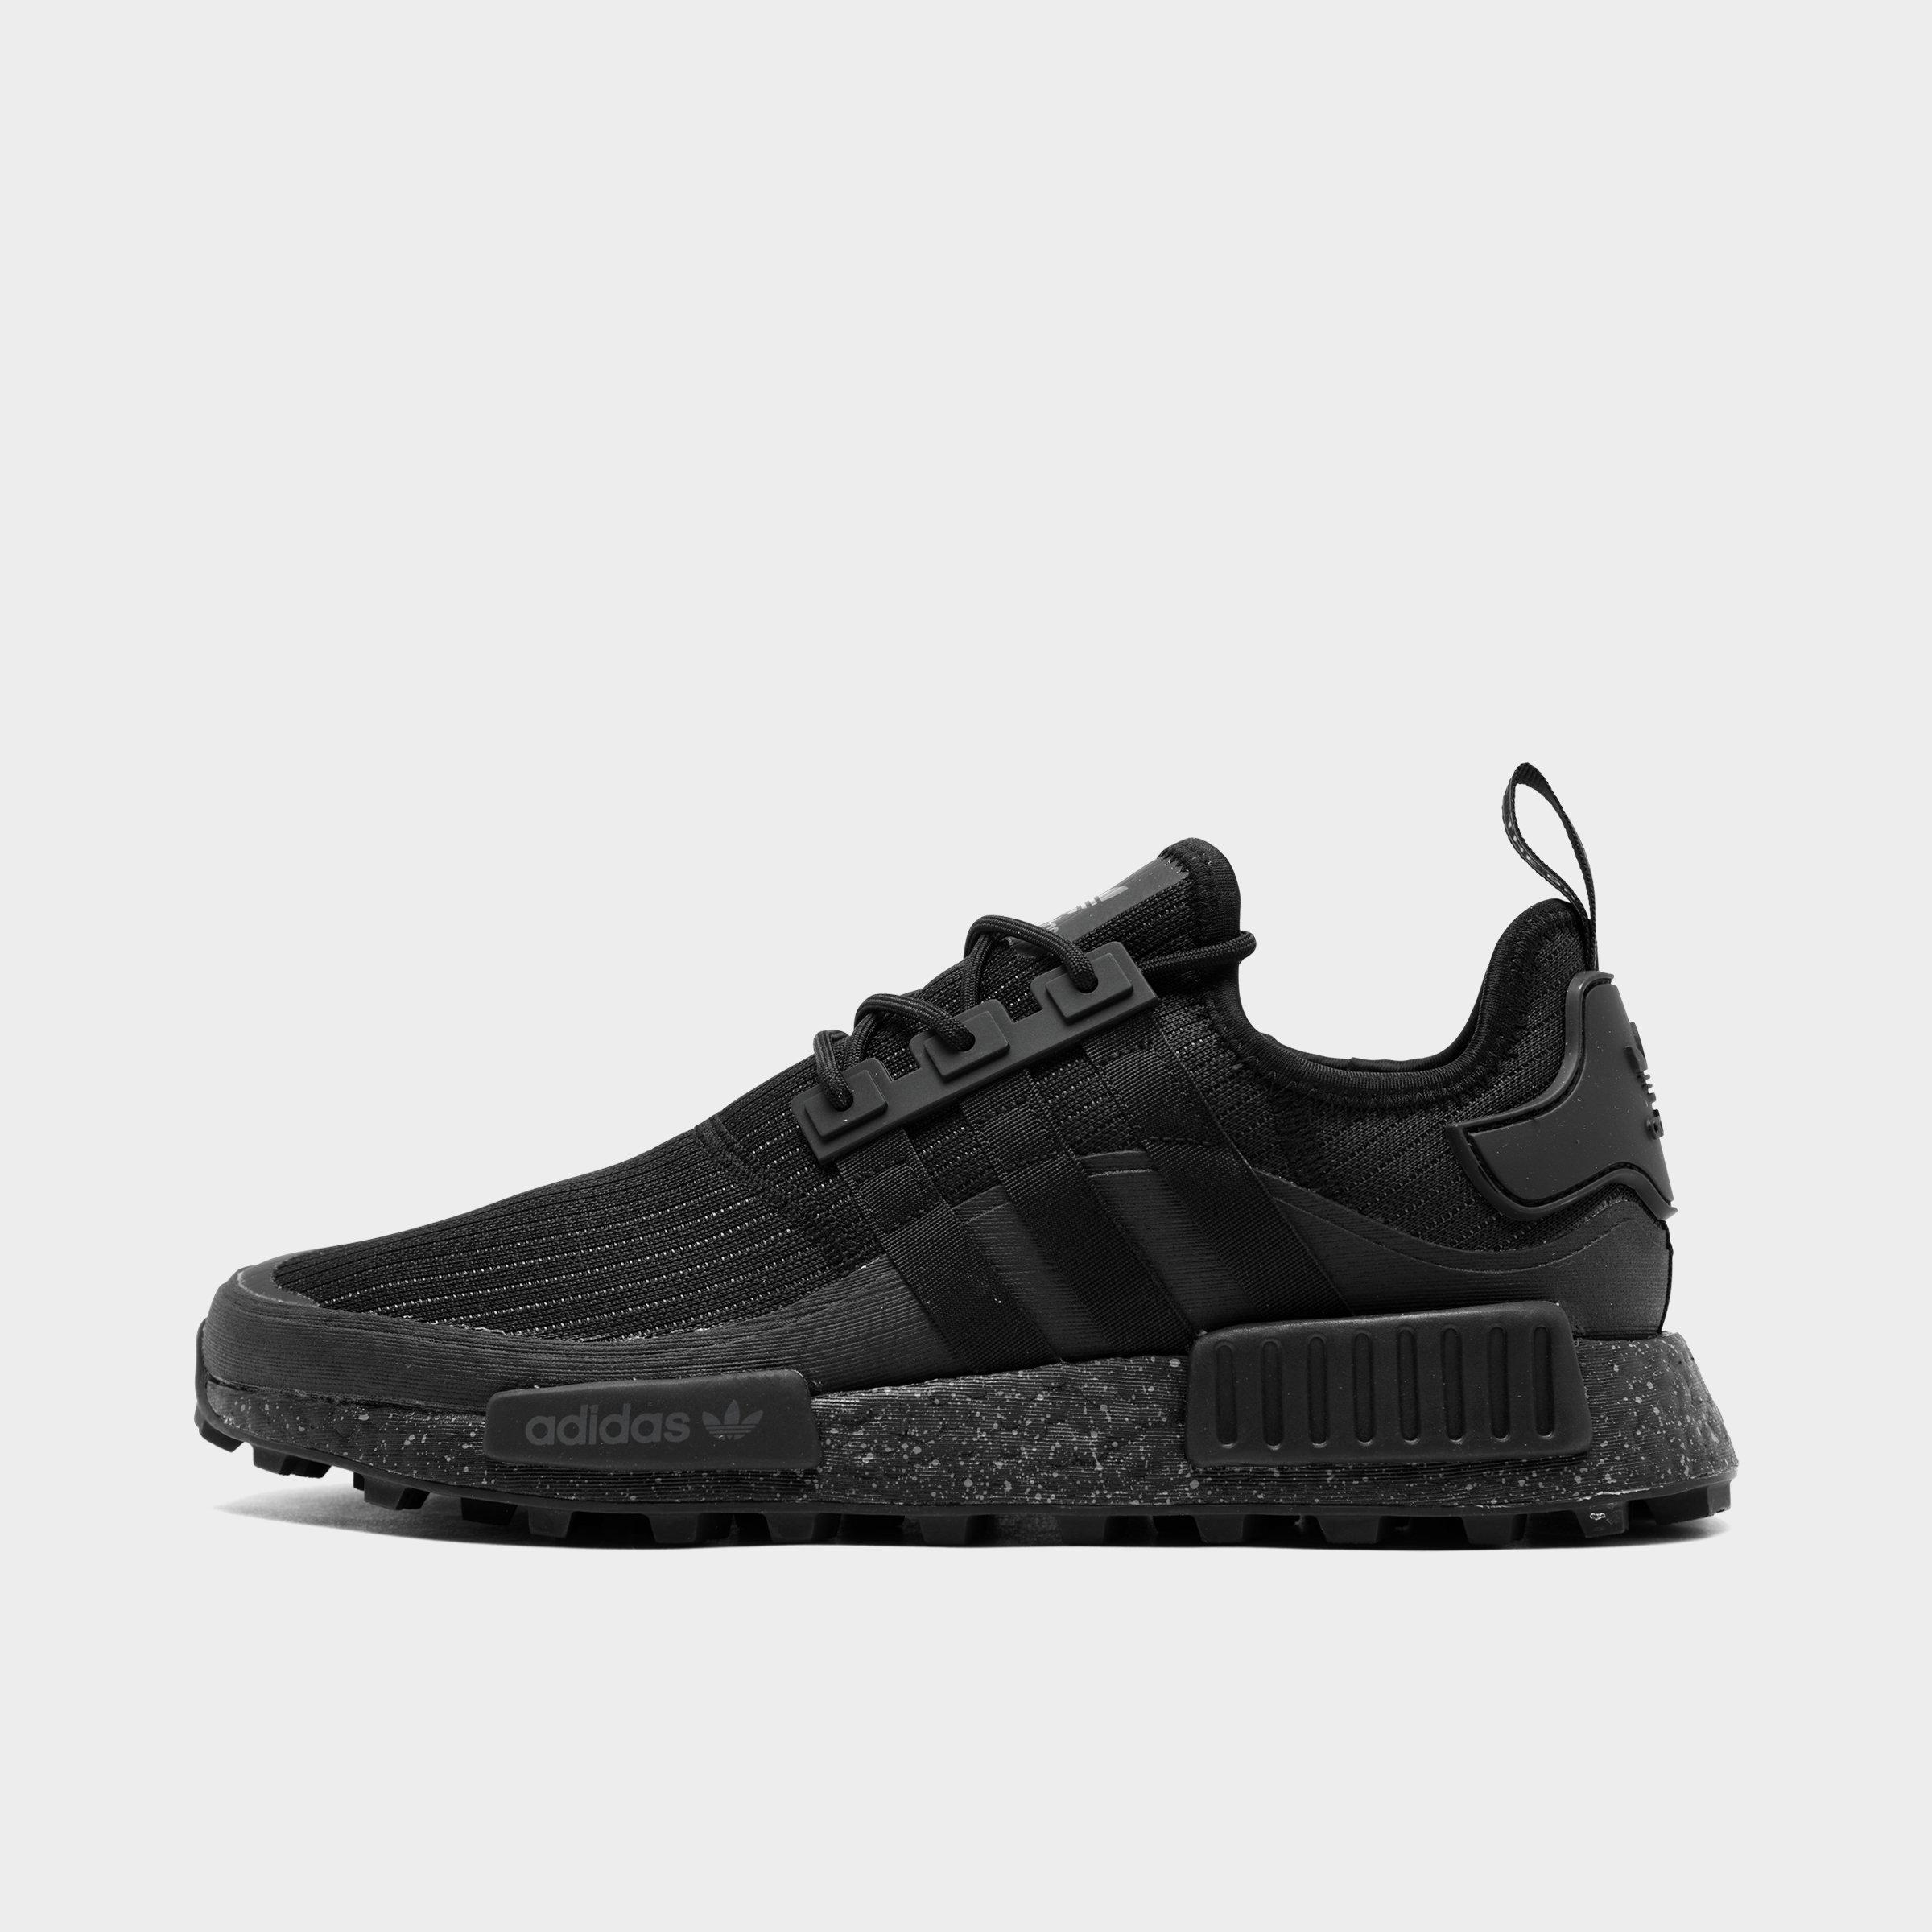 Shop Now For The Adidas Men's NMD R1 Trail Running Shoes Black/Core Black Size 13.0 Knit AccuWeather Shop